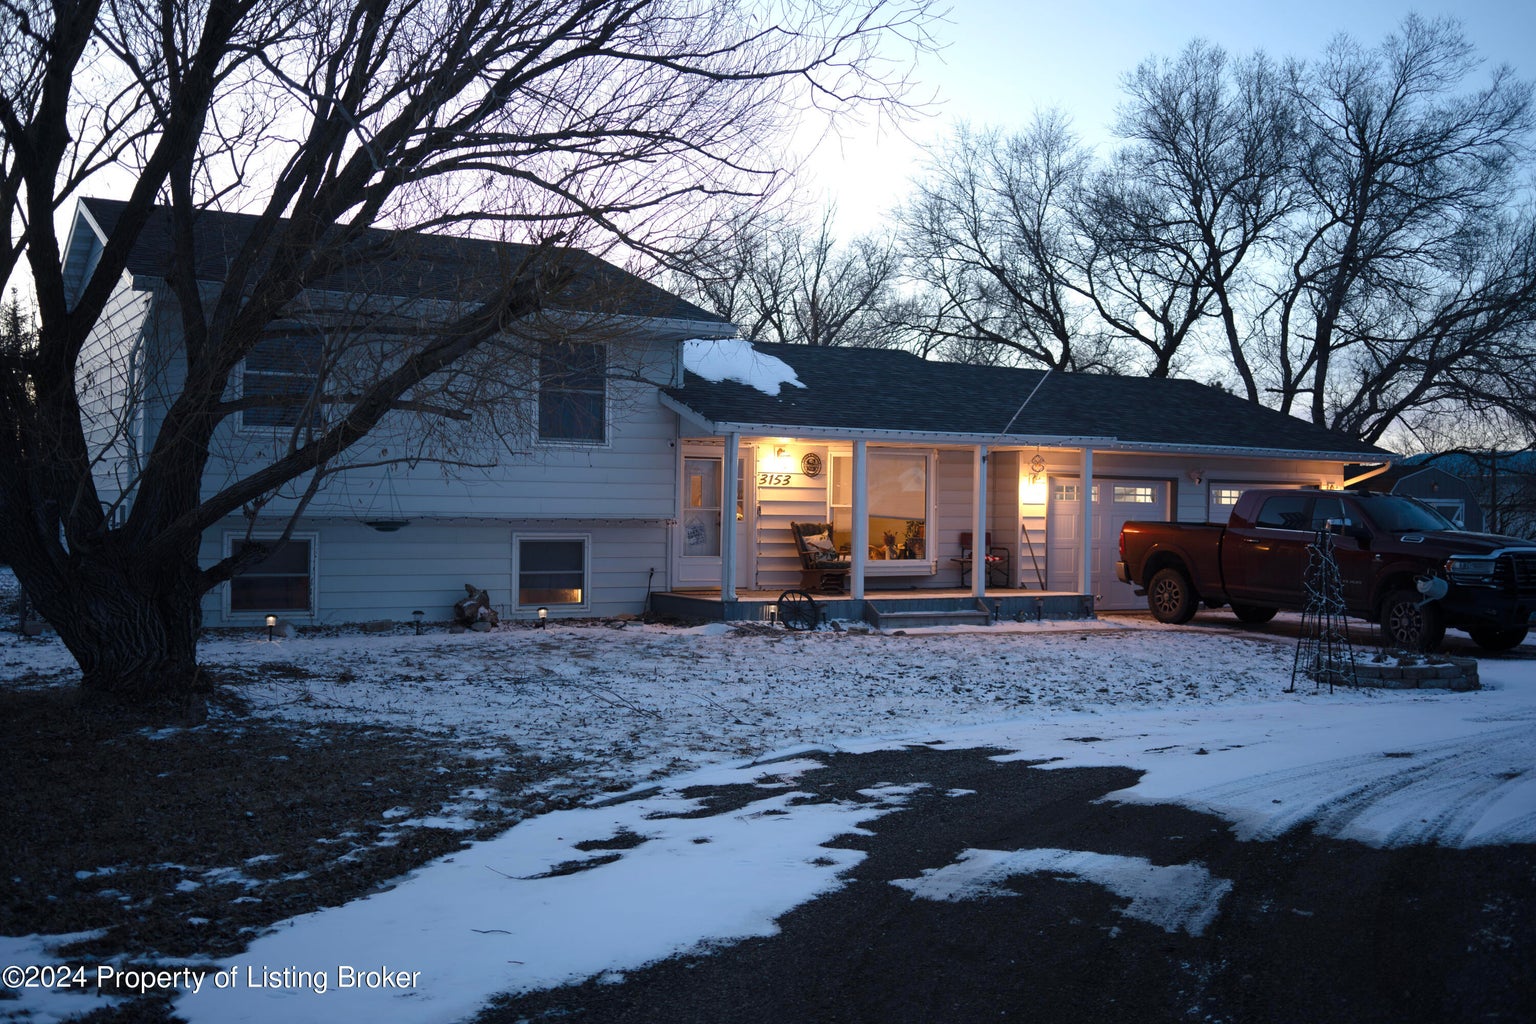 House for sale in rural Dickinson, ND